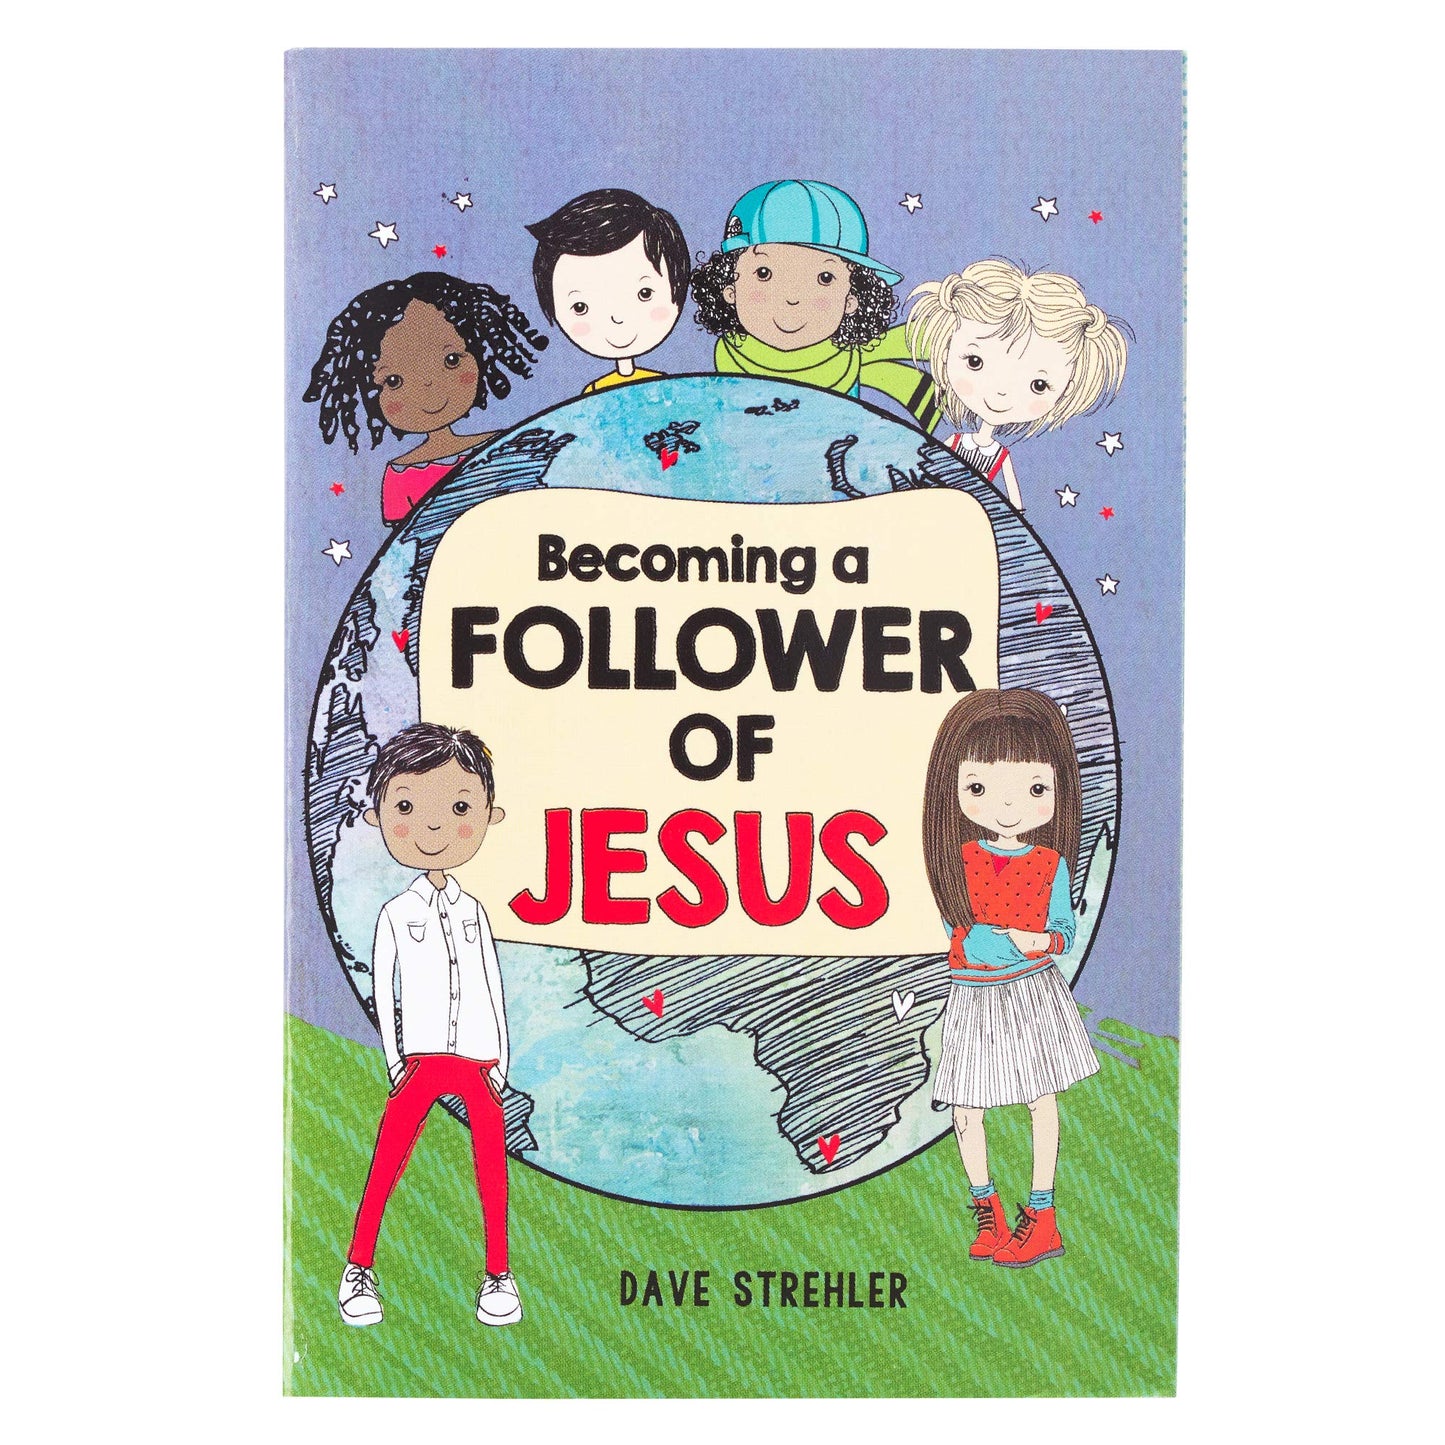 Becoming a Follower of Jesus